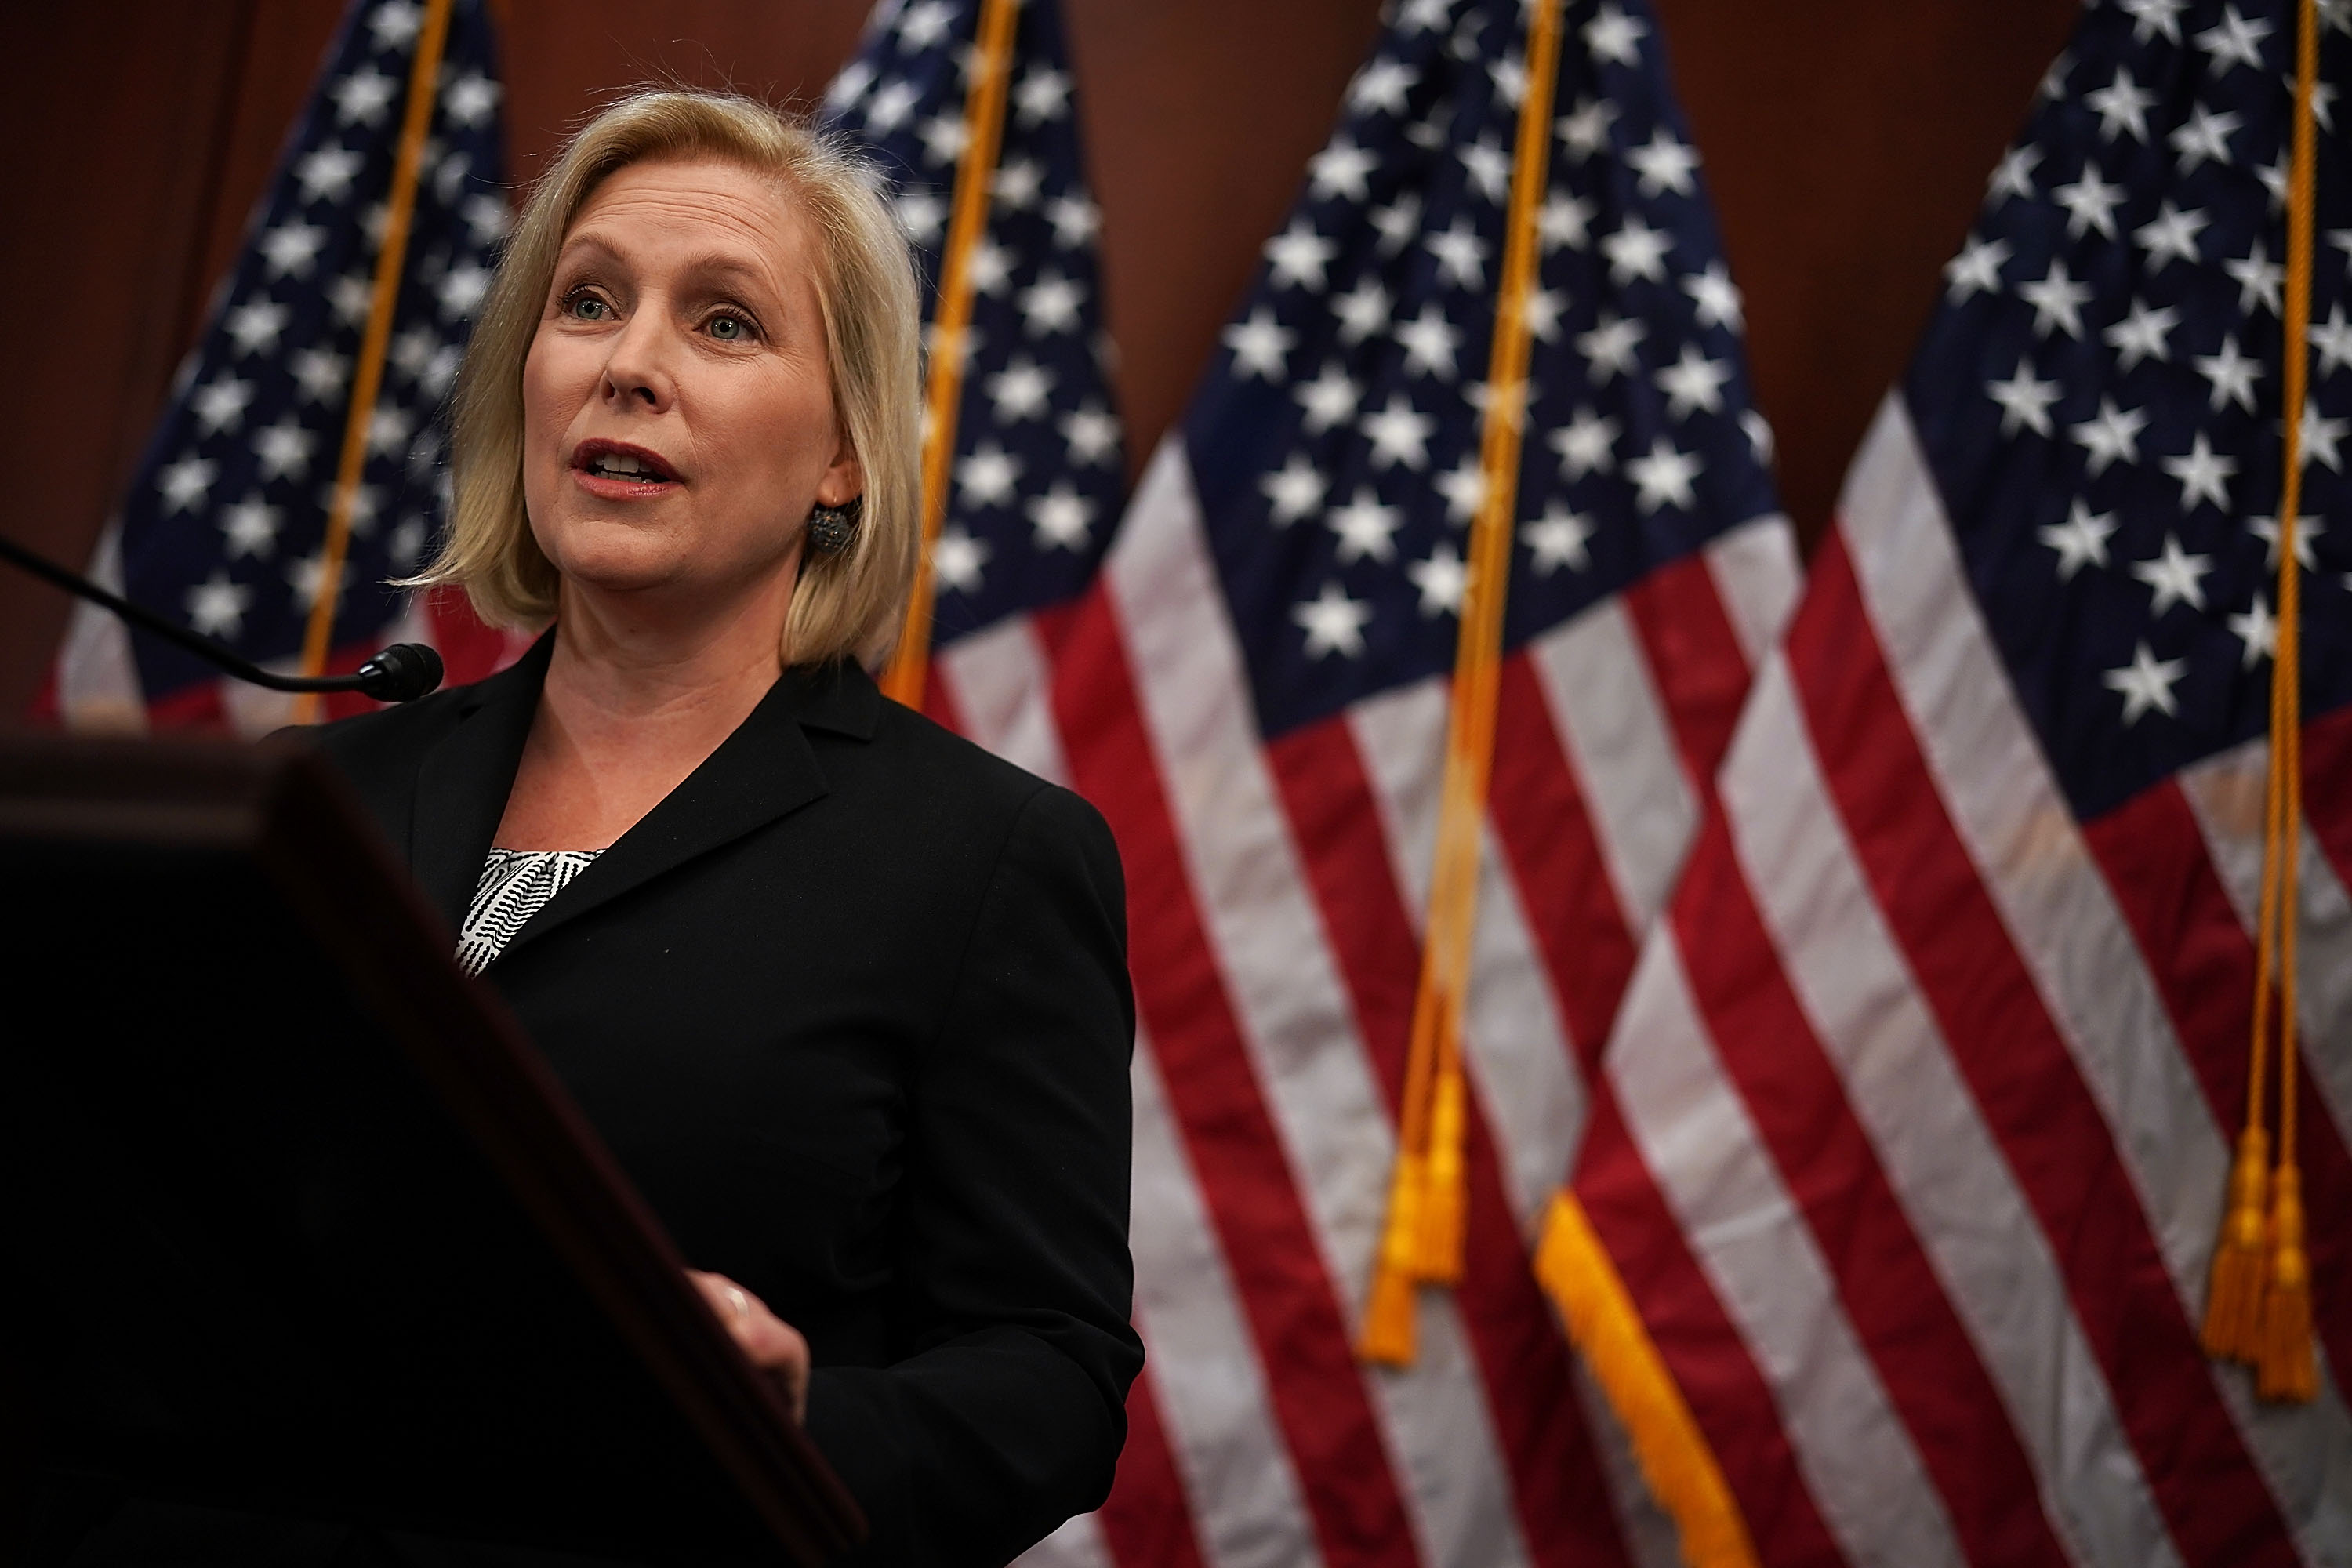 Kirsten Gillibrand speaks at a news conference